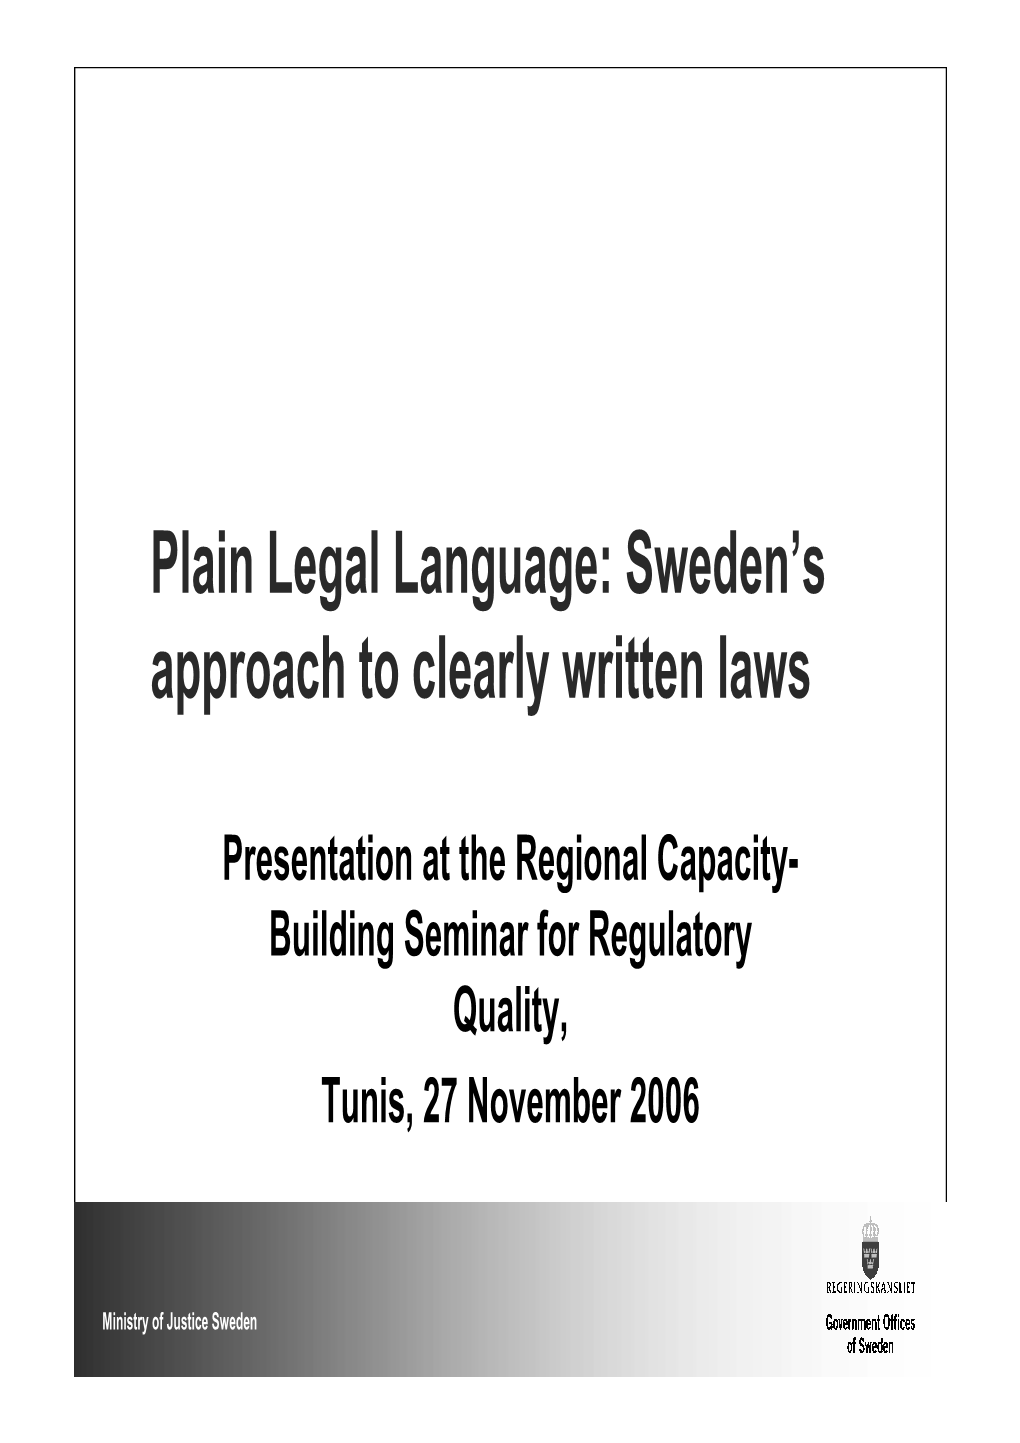 Plain Legal Language: Sweden's Approach to Clearly Written Laws